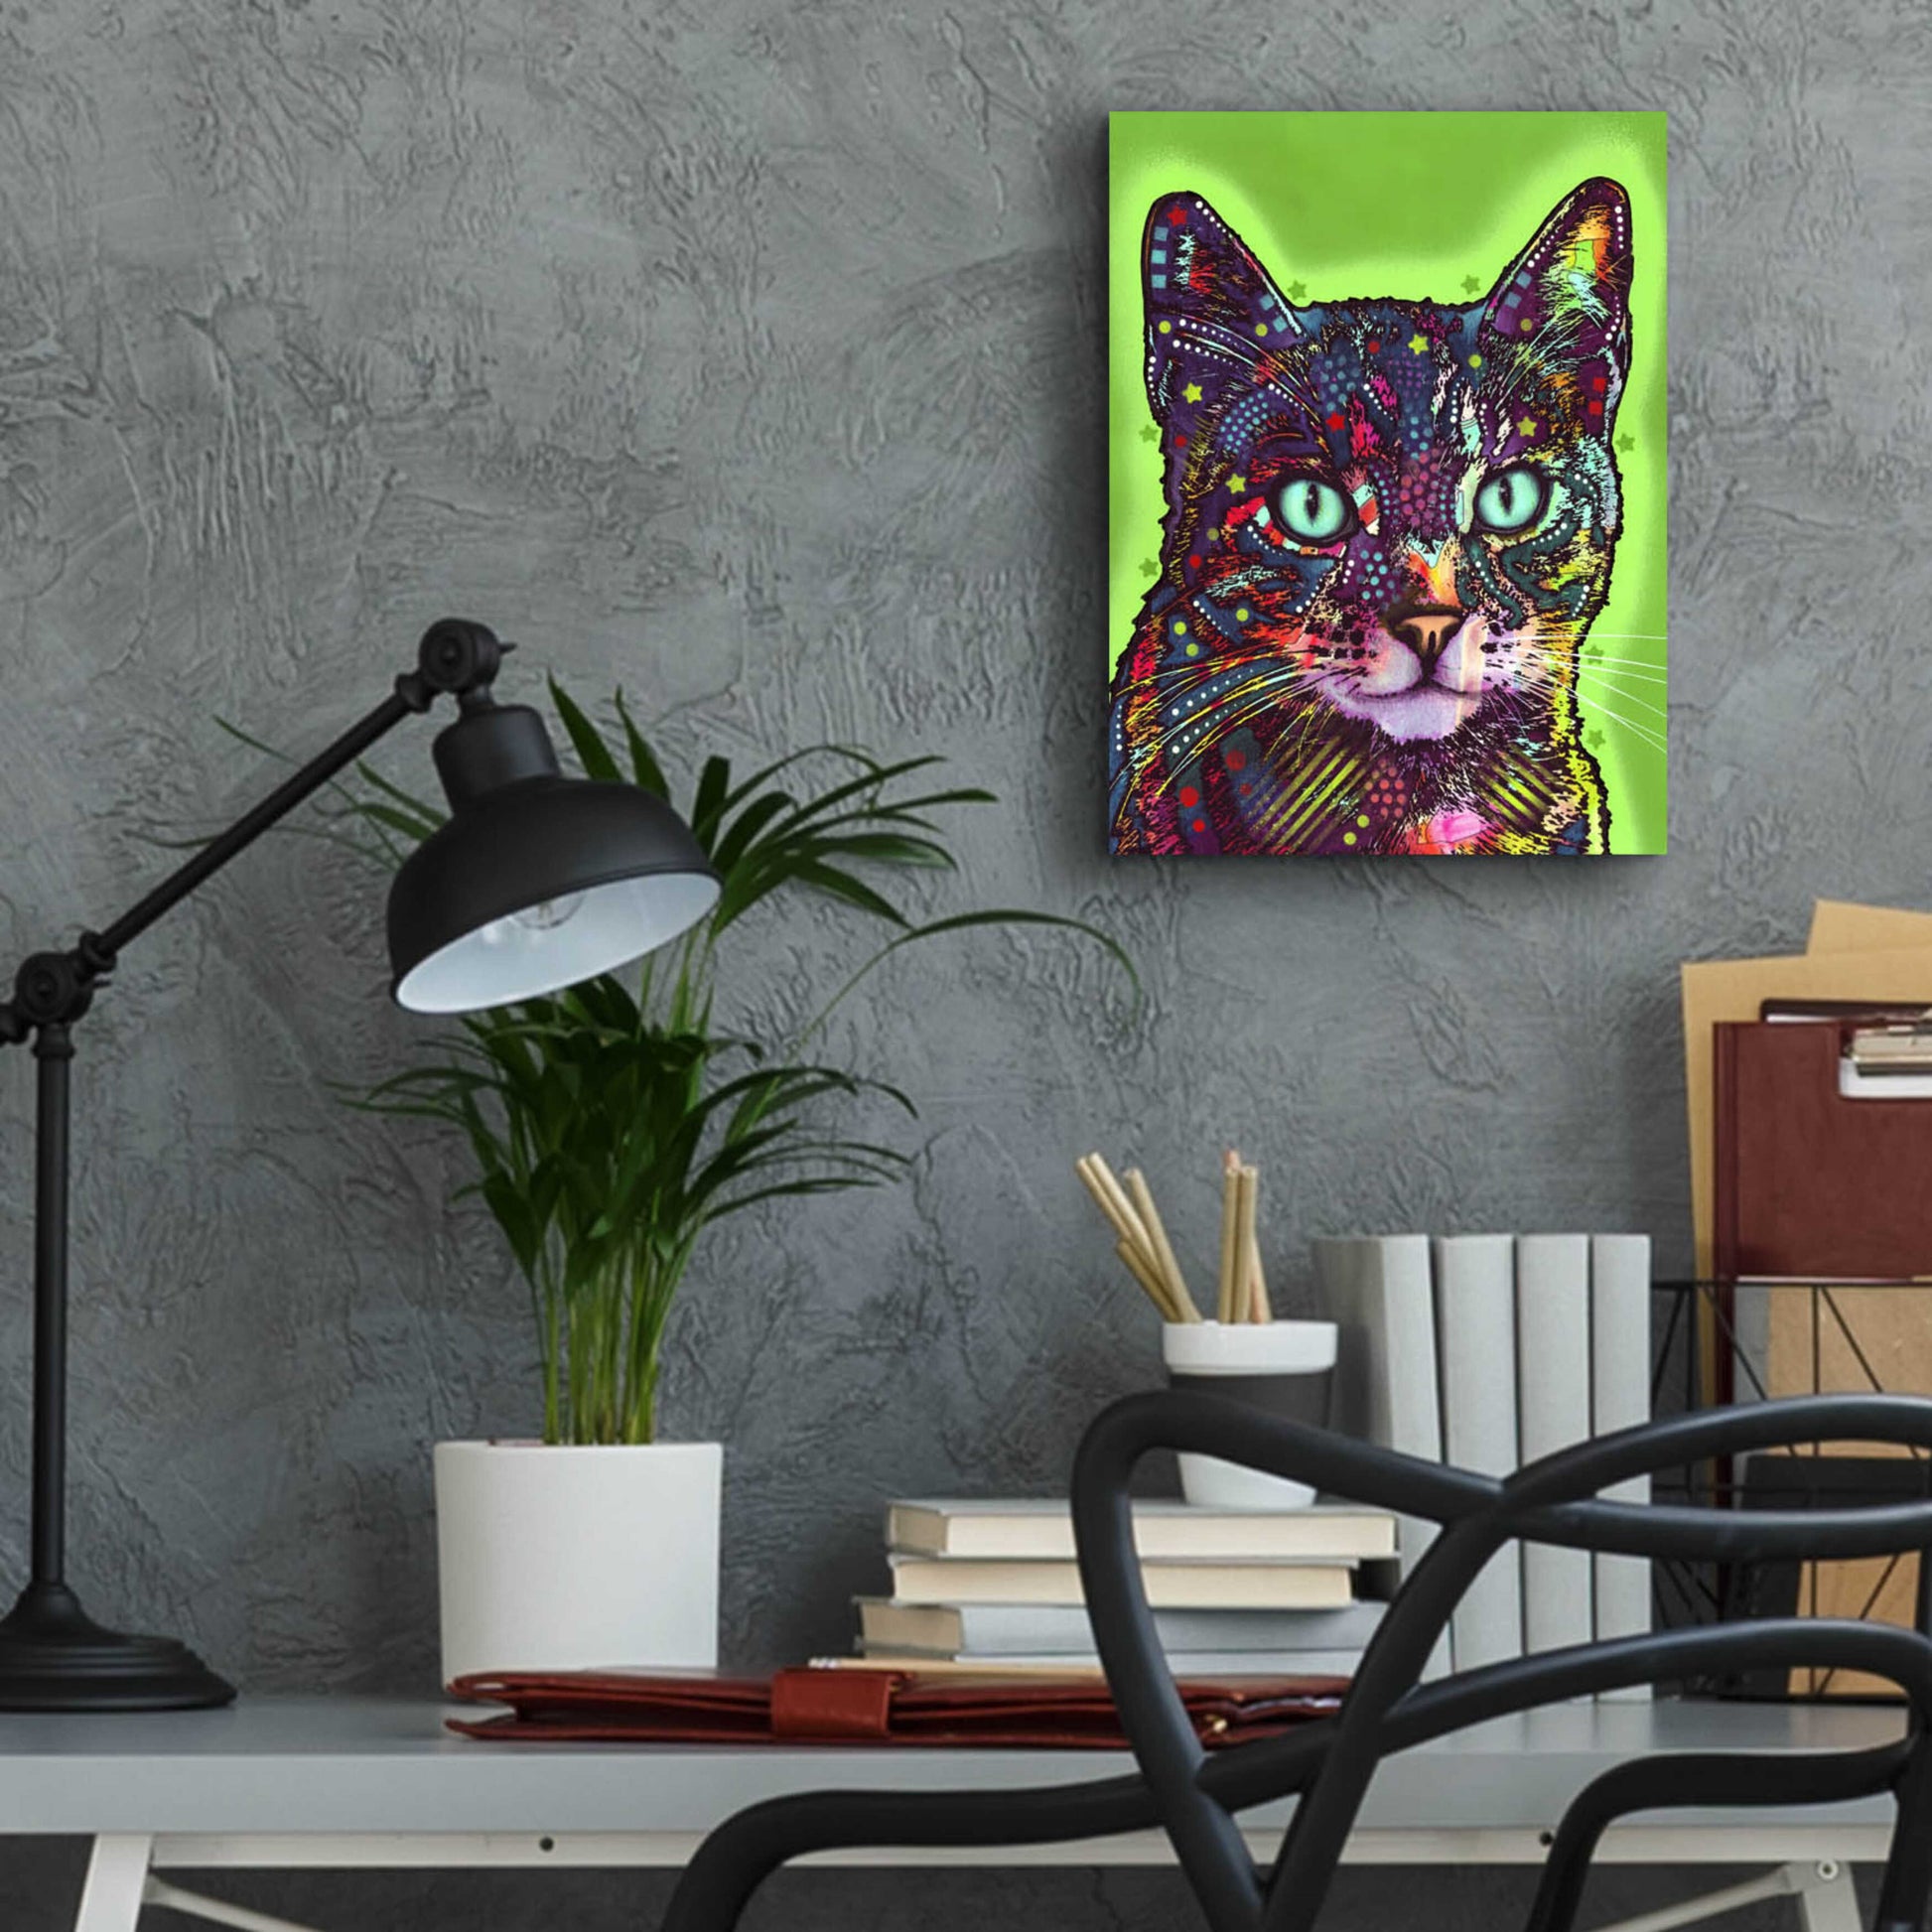 Epic Art 'Watchful Cat' by Dean Russo, Acrylic Glass Wall Art,12x16